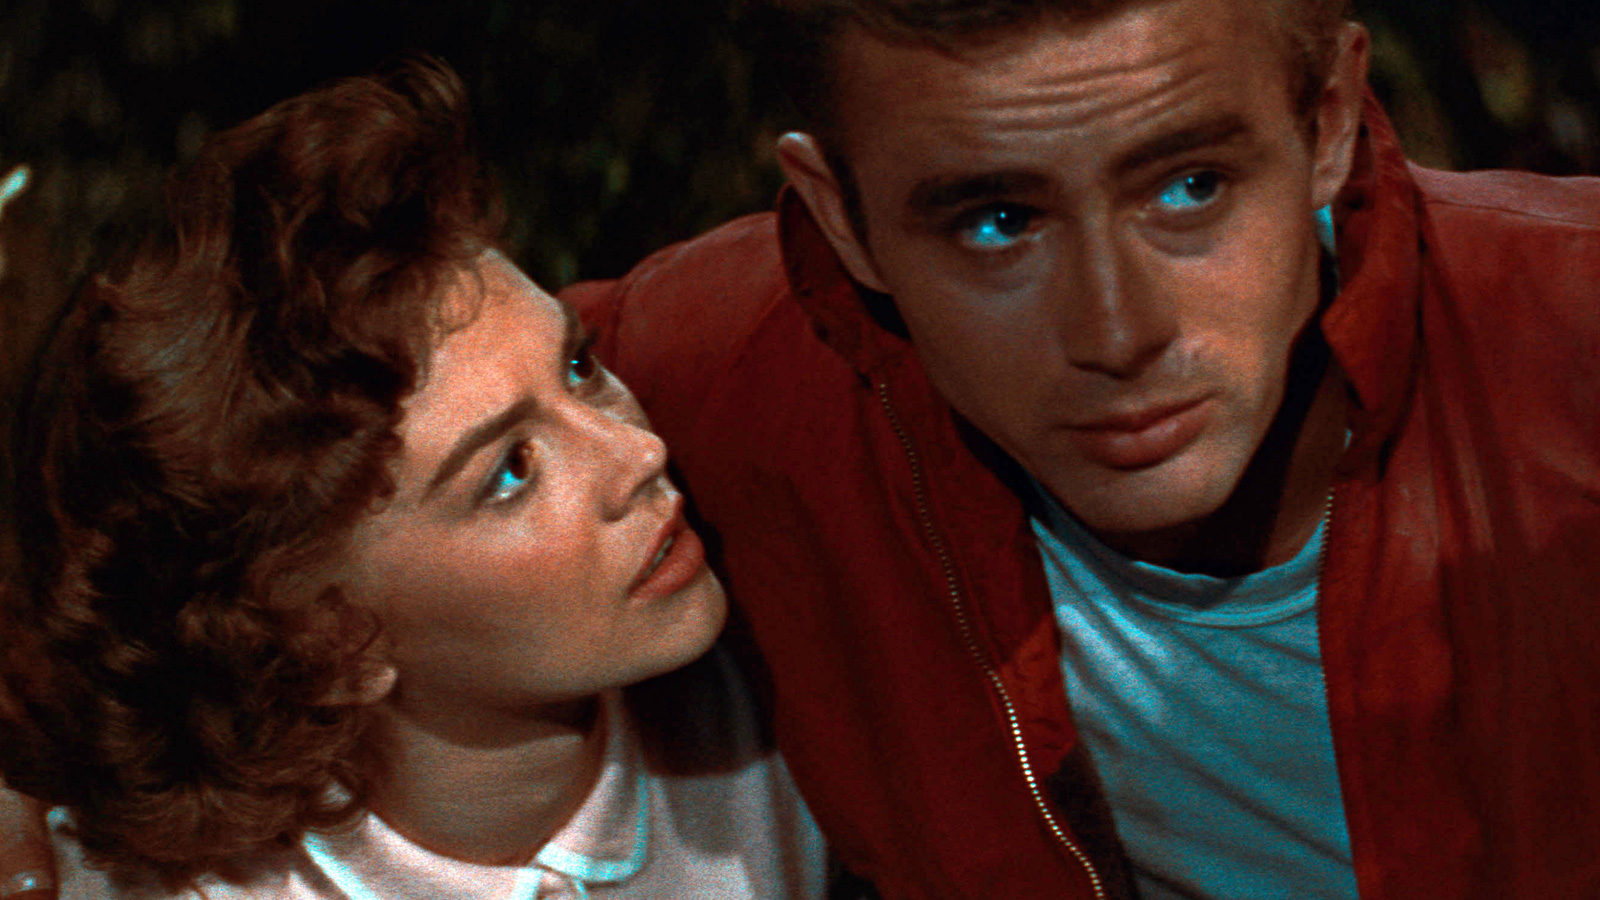 Only a Film Buff Can Name at Least 14/20 🎟️ Top Movies from the 1950s Rebel Without A Cause (1955)